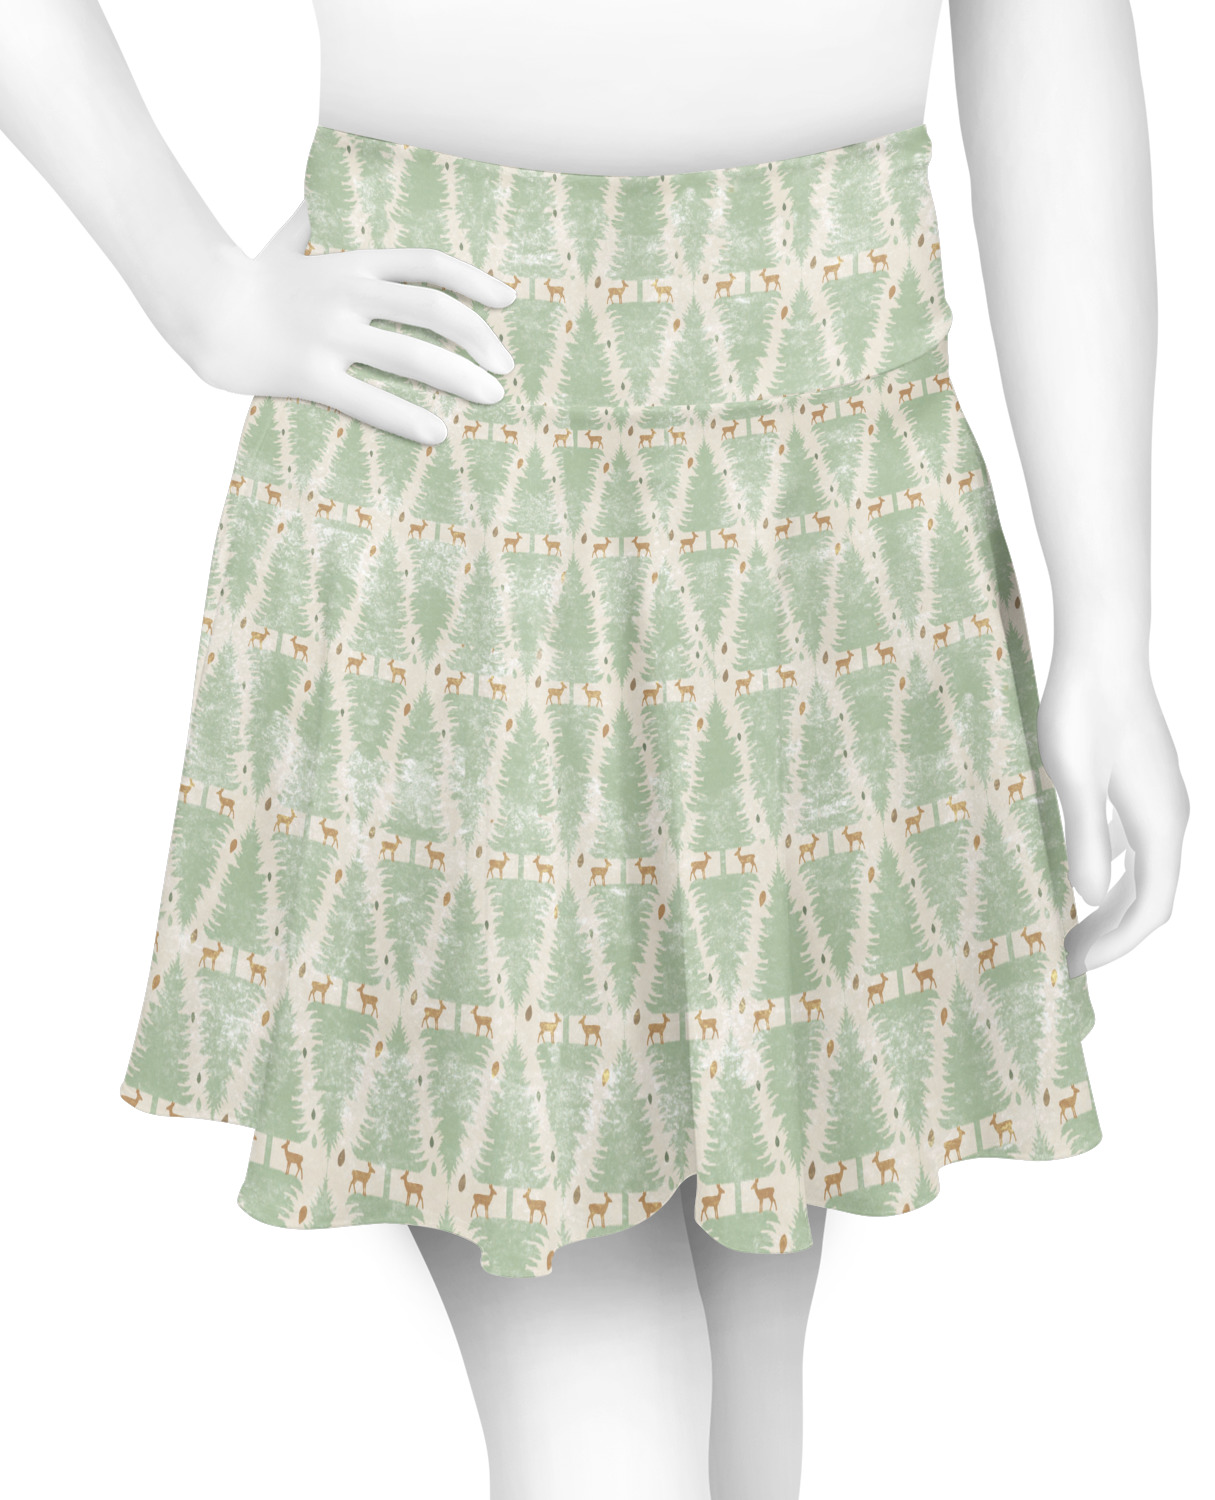 Deer Skater Skirt - 2X Large (Personalized) - YouCustomizeIt